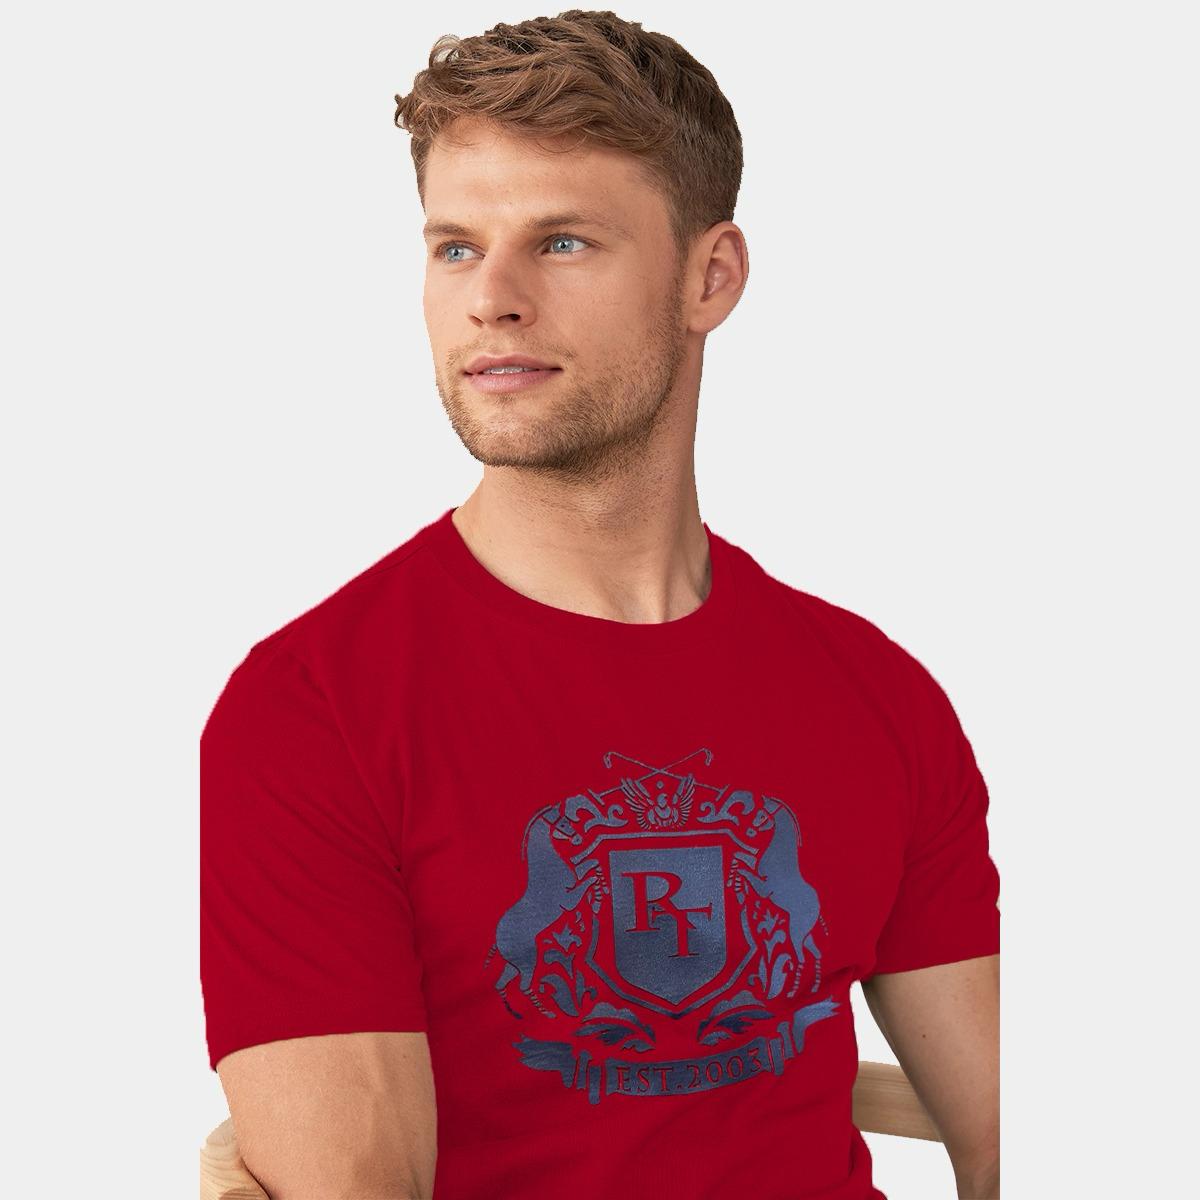 Branded Round Neck Fashion Tee Shirt - Red